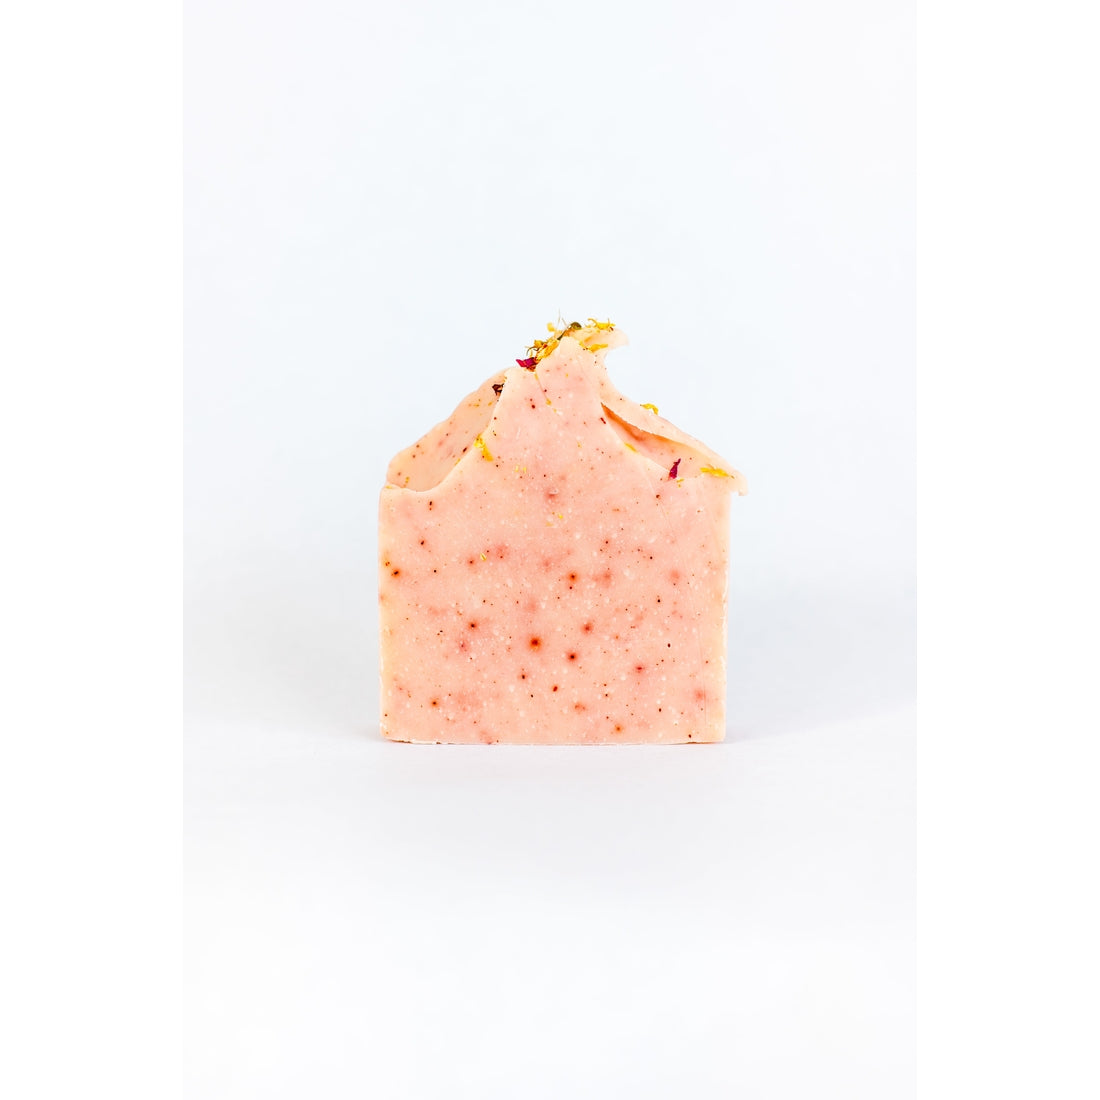 A handmade SOAK Bath Co. - Peony Soap Bar with a pale pink hue sprinkled with dried flower petals, positioned against a plain white background.